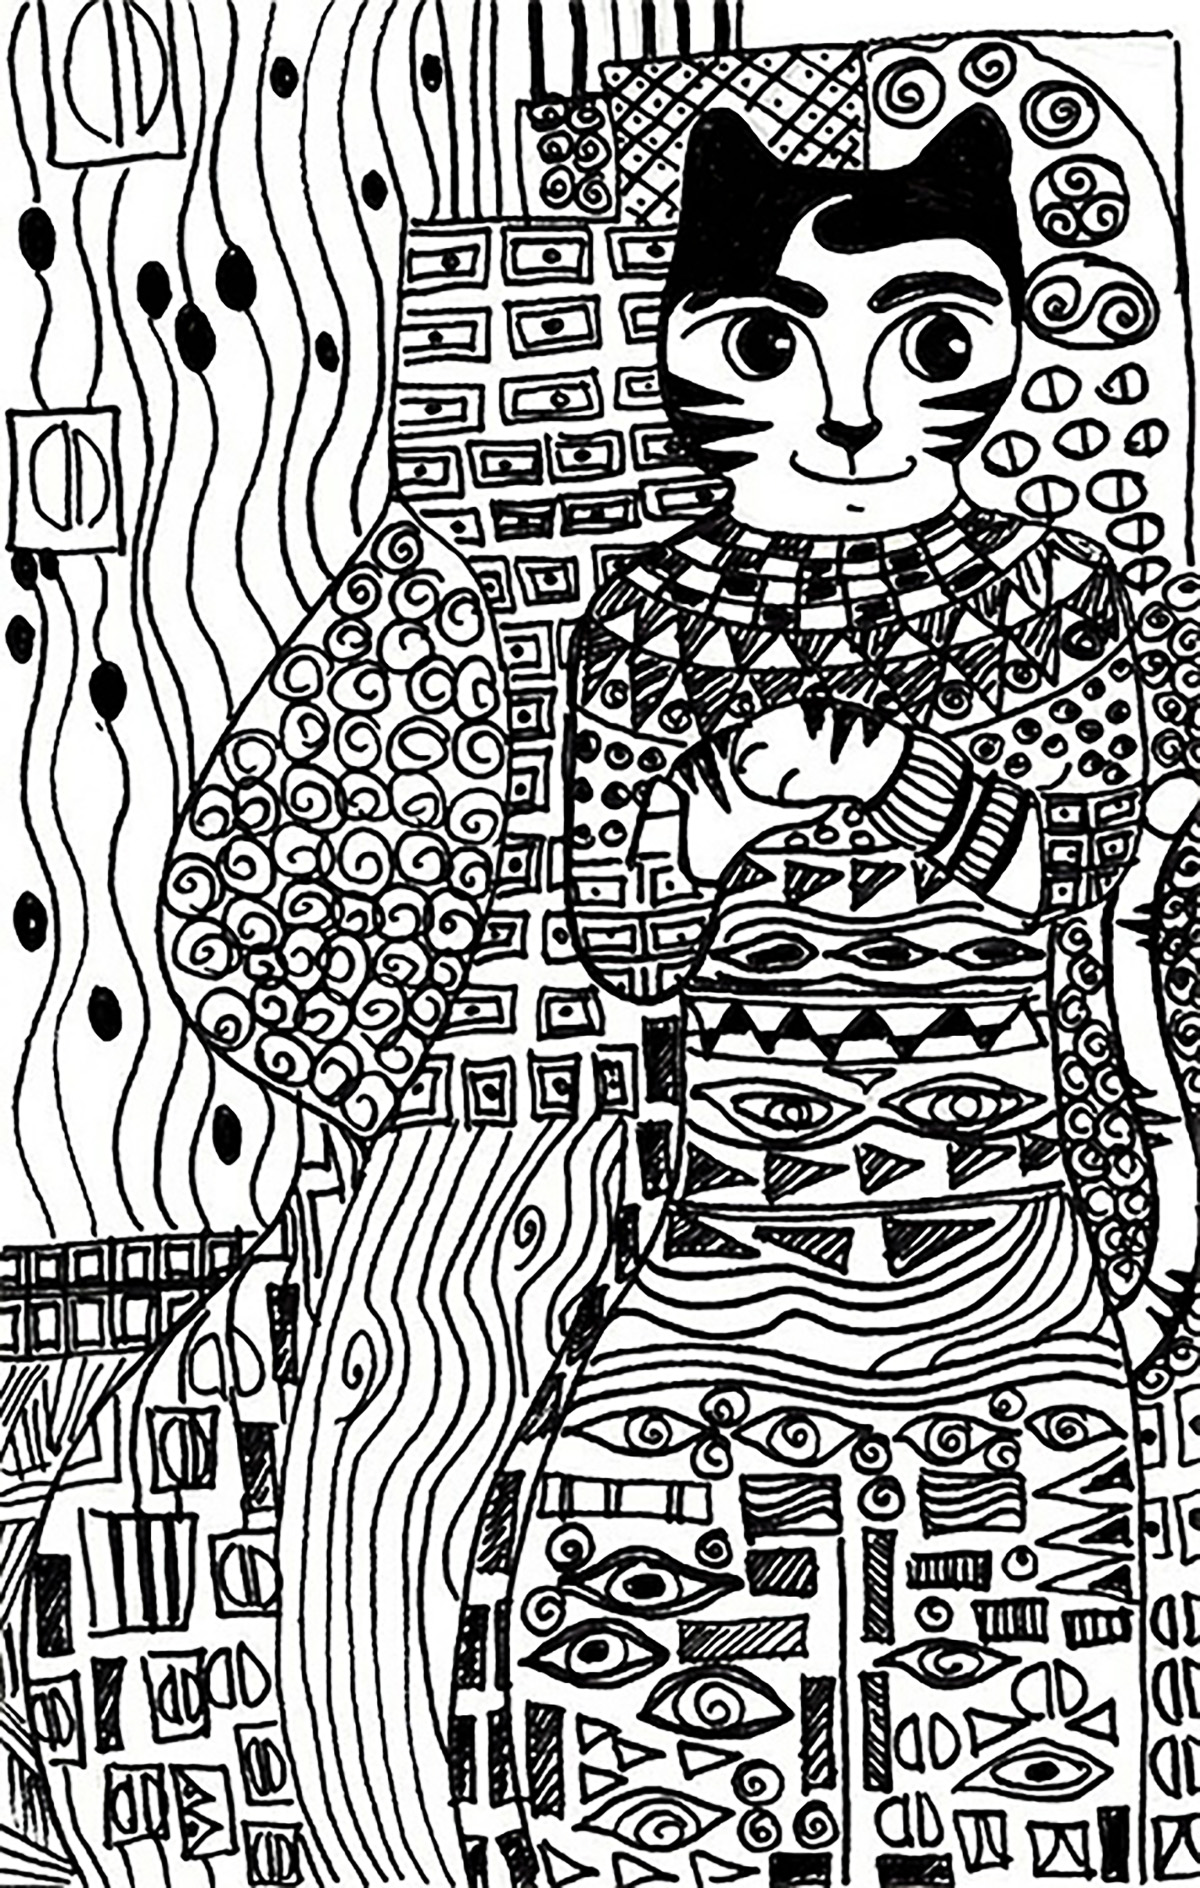 Free Adult coloring page to download